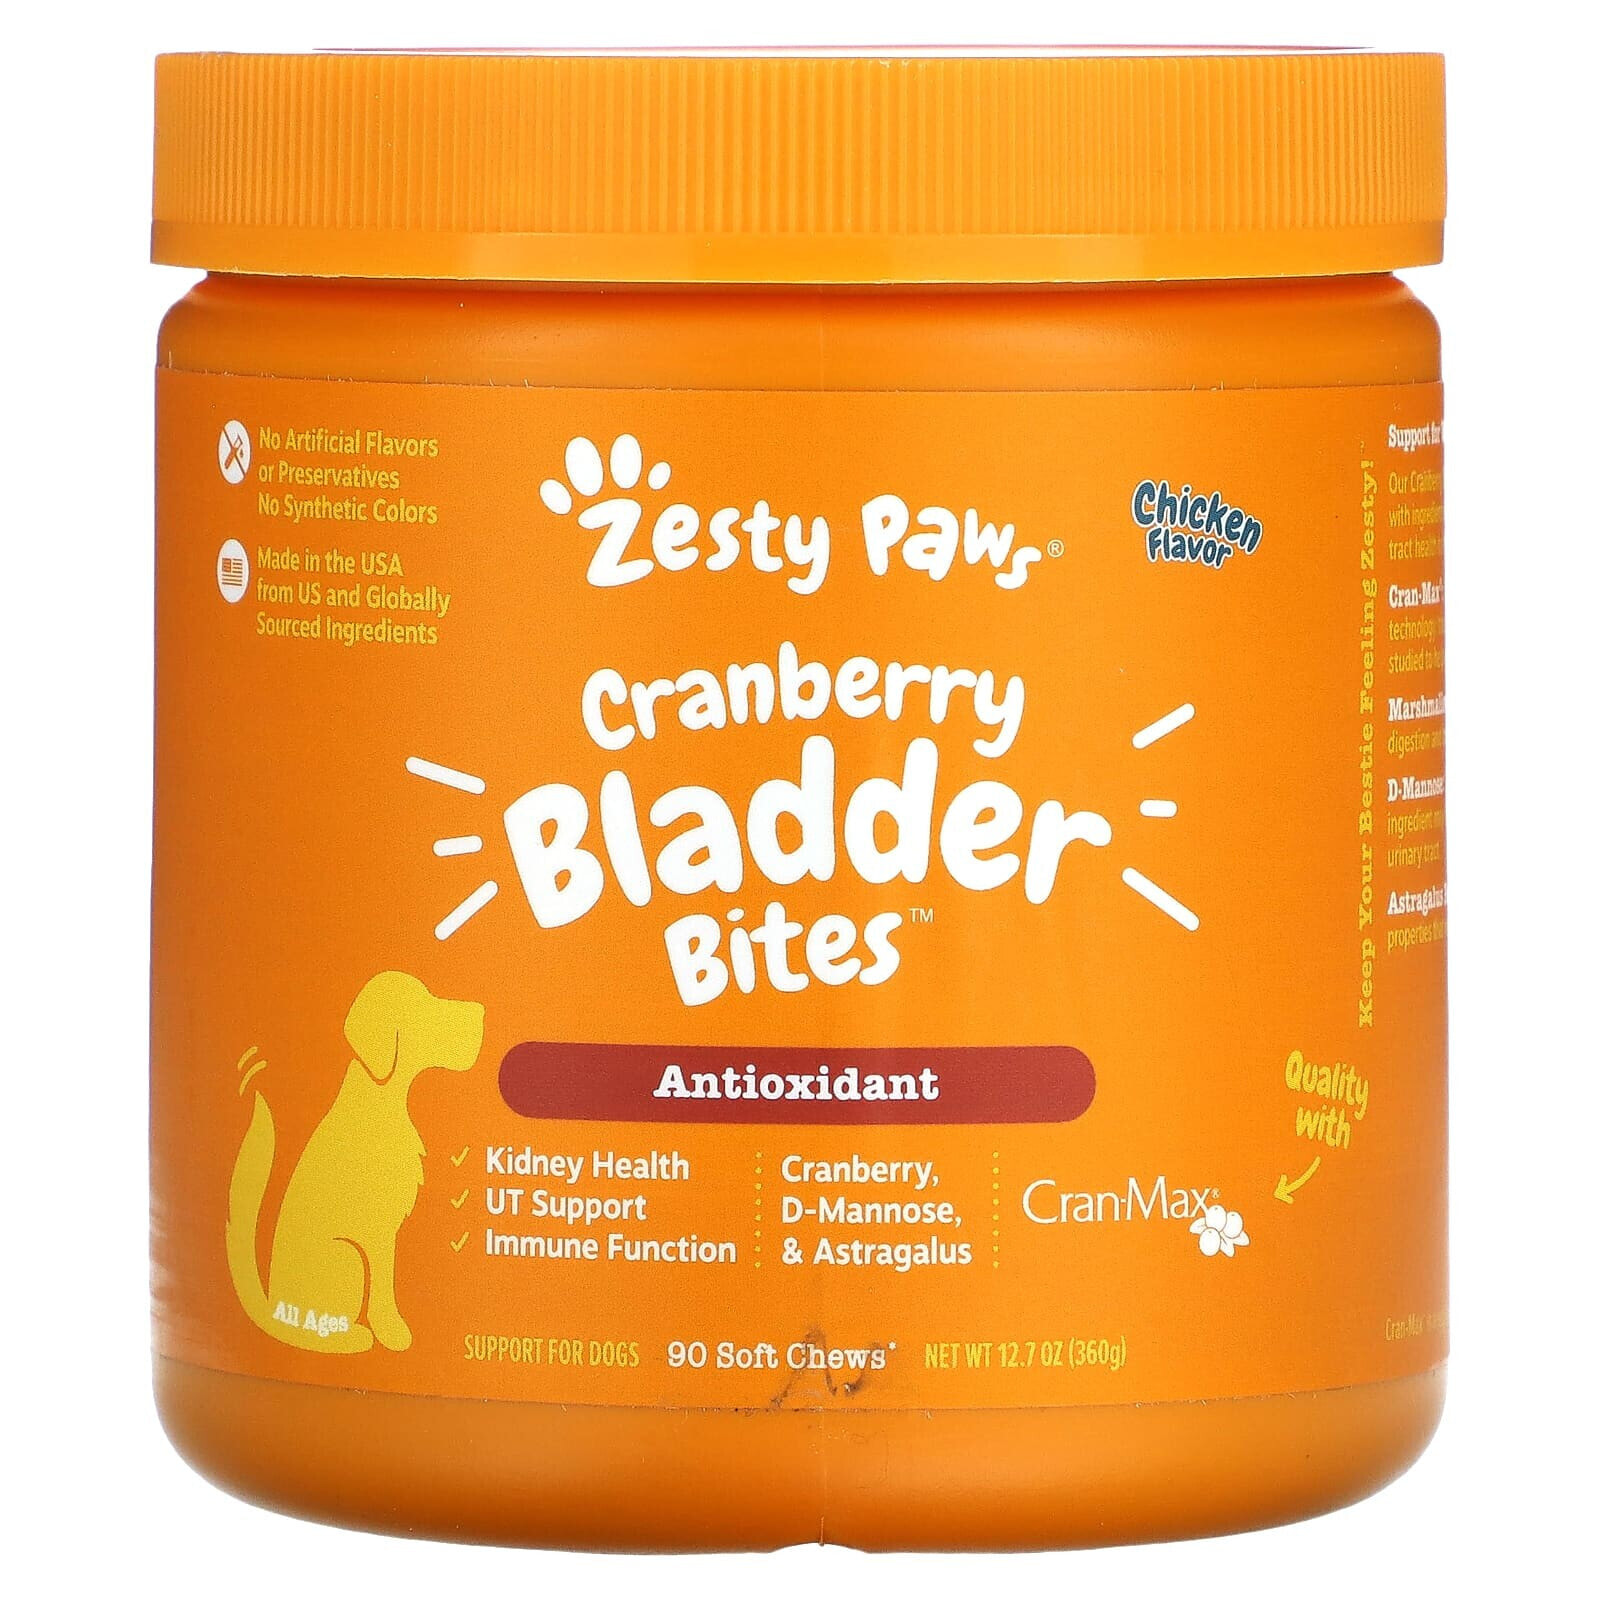 Cranberry Bladder Bites for Dogs, Antioxidant, All Ages, Bacon, 90 Soft Chews, 12.7 oz (360 g)